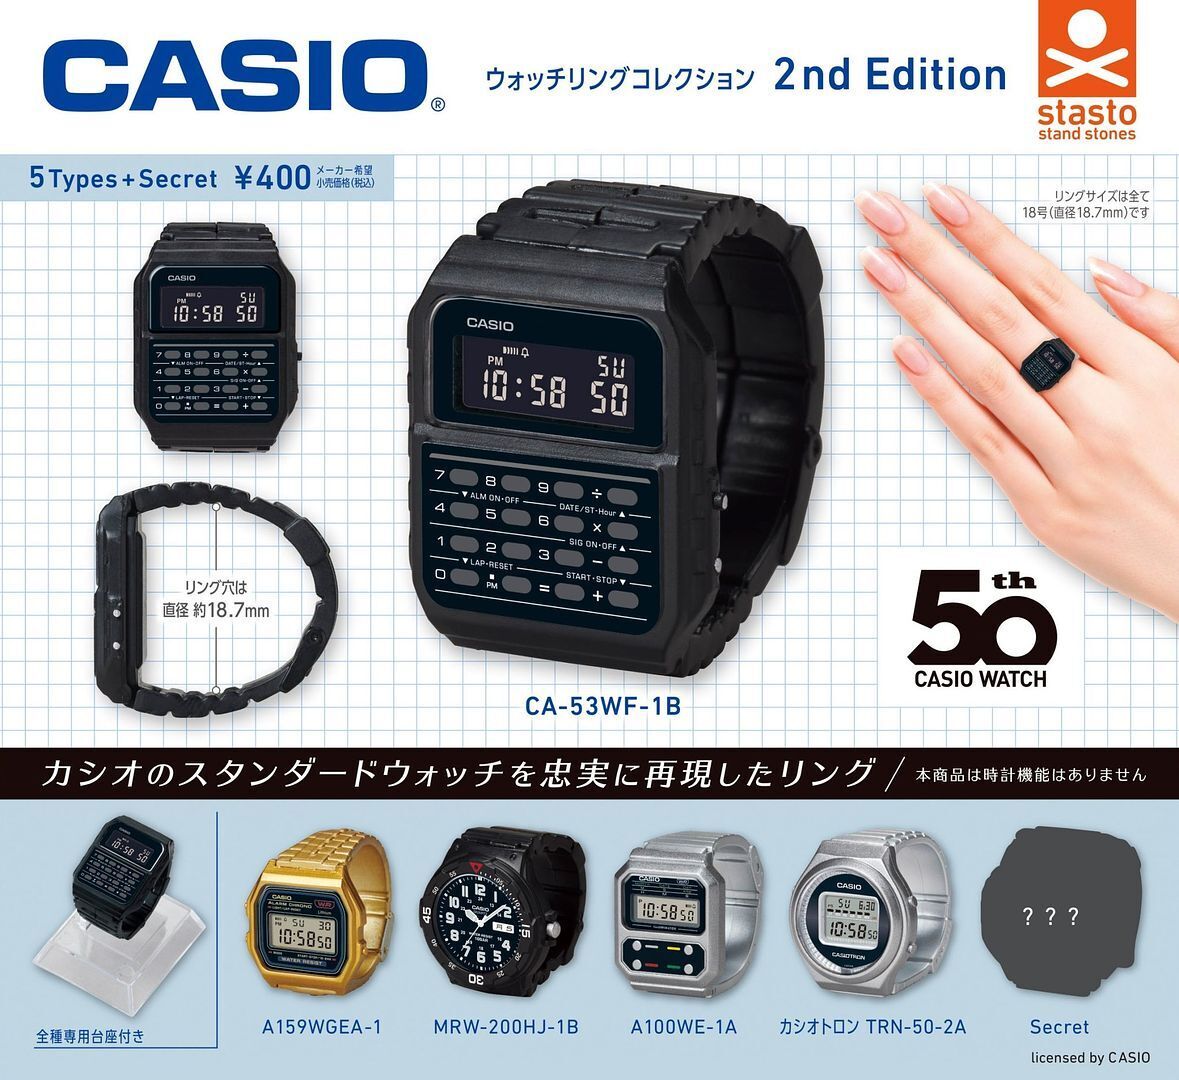 CASIO Watch Ring Collection 2nd editiion Complete set Capsule Toy Gacha figure